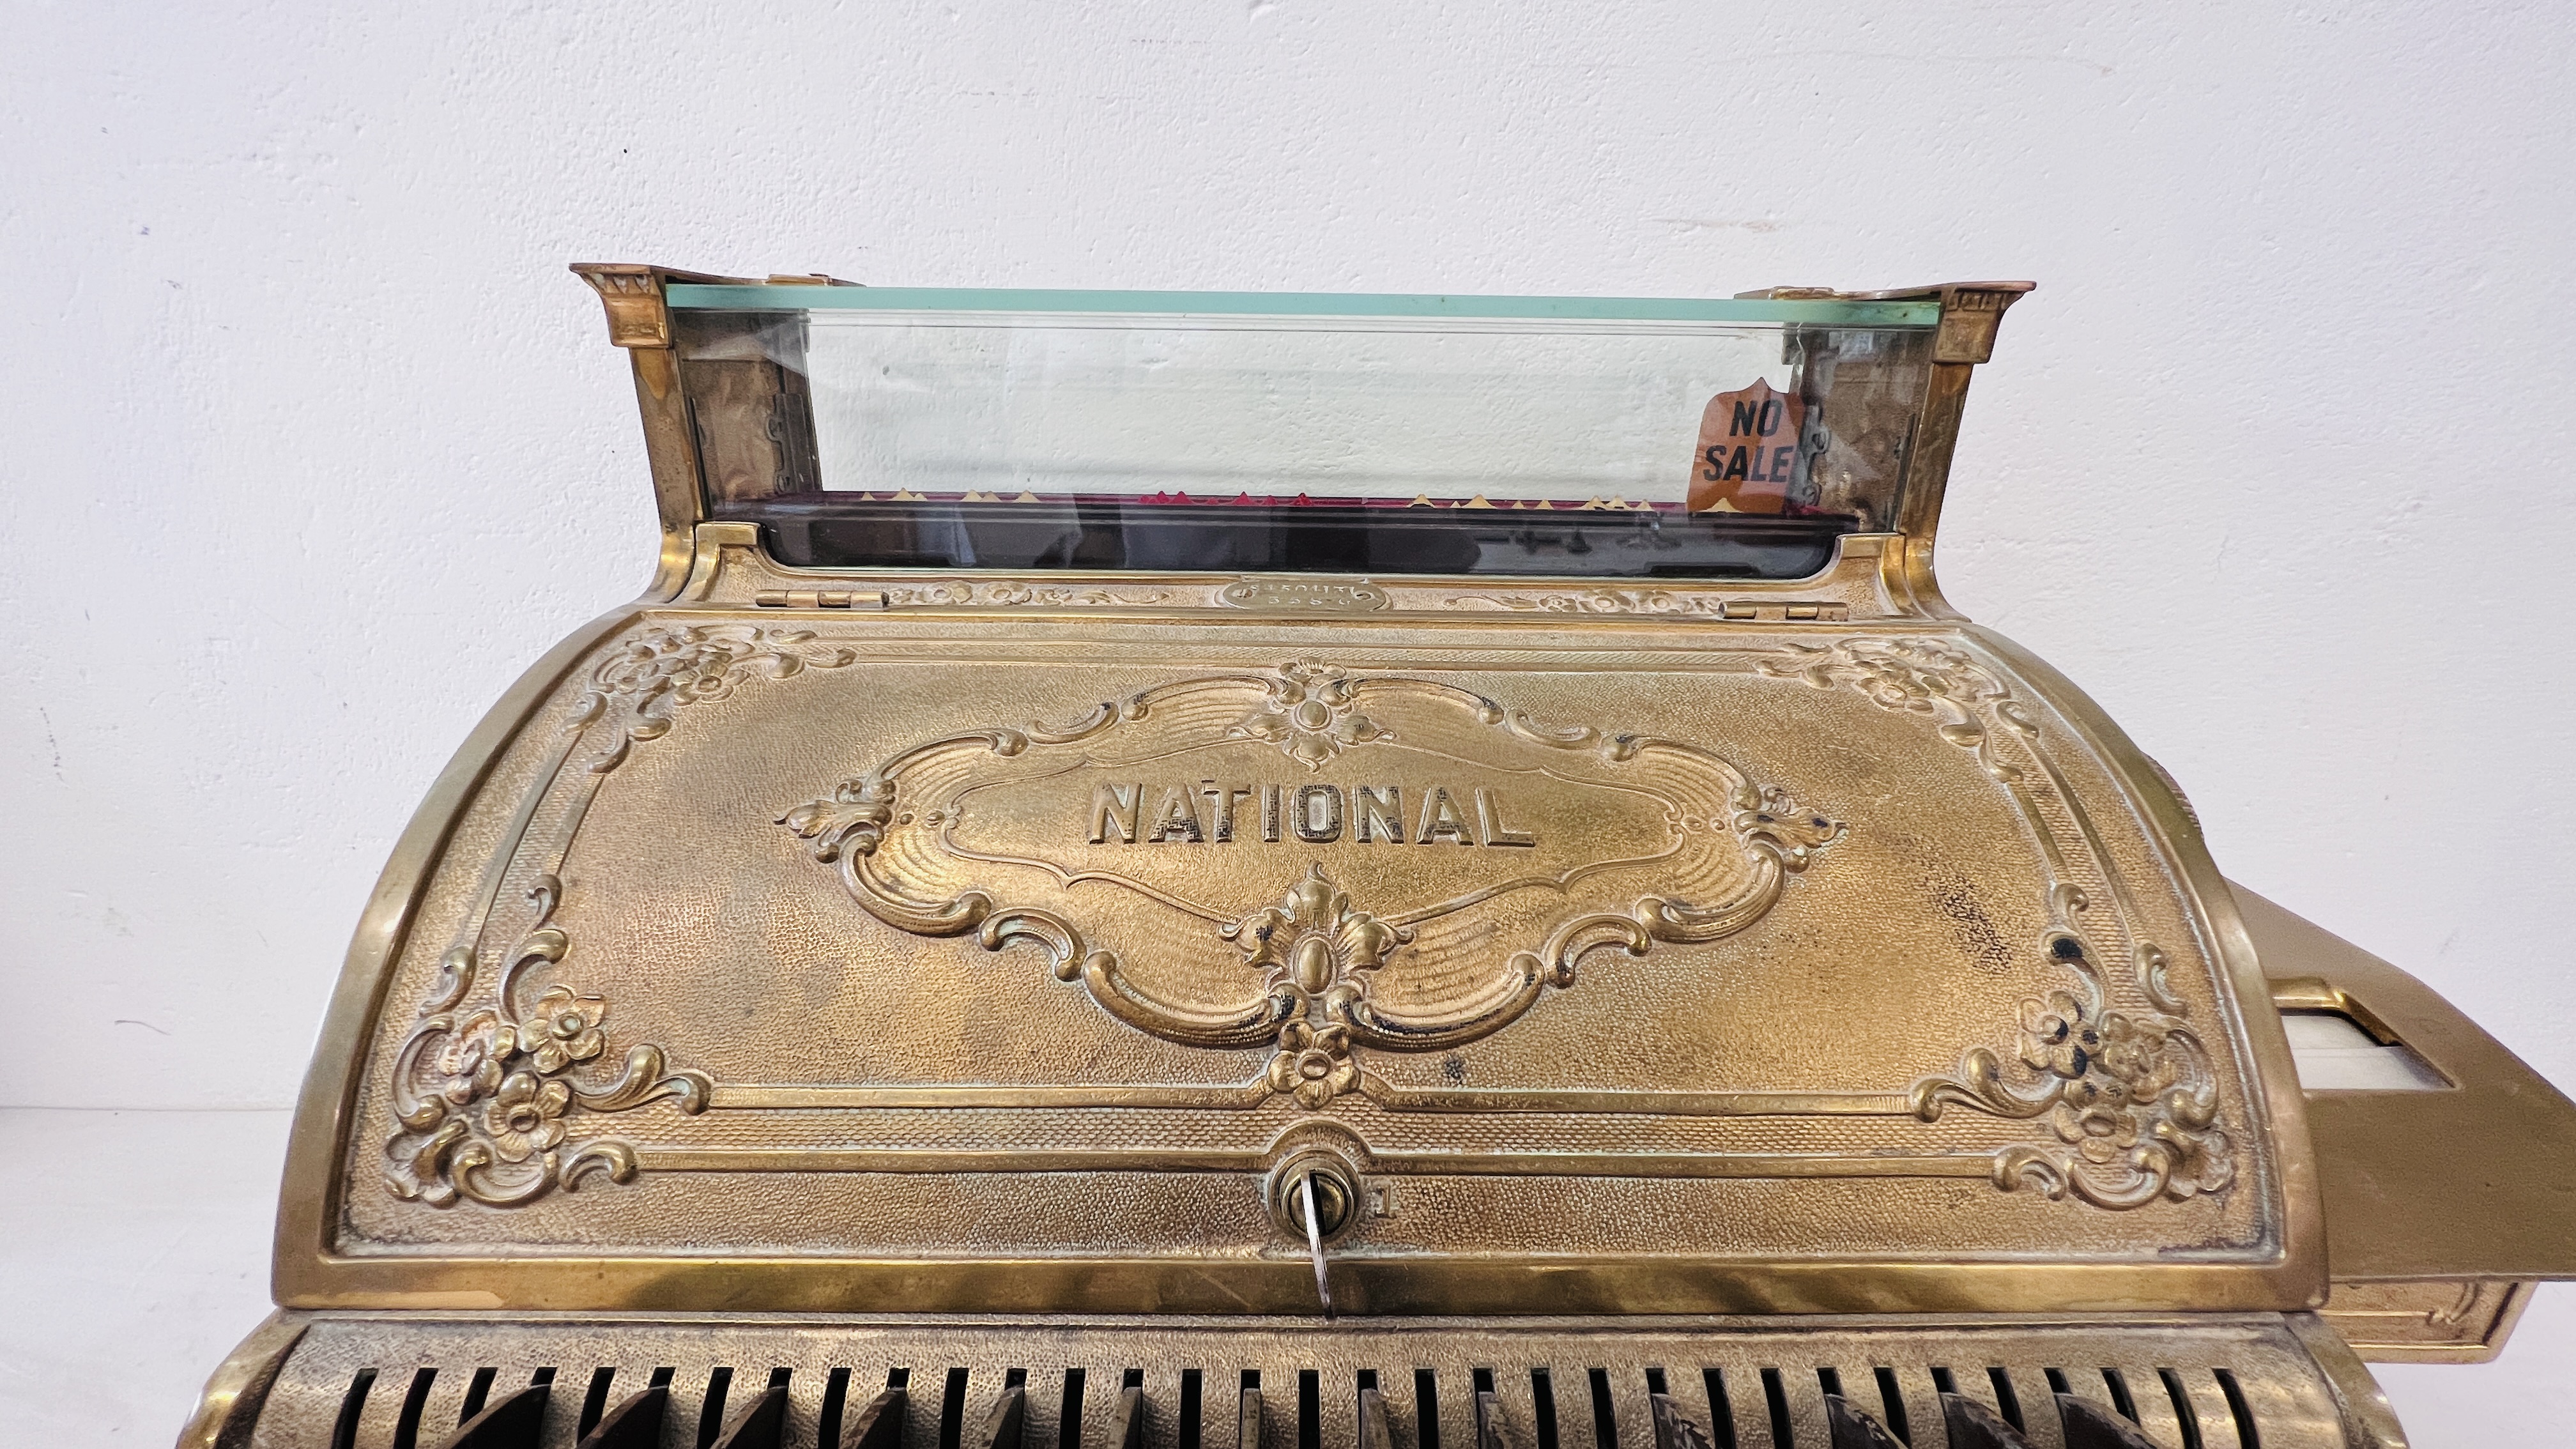 A LARGE 19TH CENTURY NATIONAL CASH REGISTER BRASS TILL - WIDTH 55CM BEARING PLAQUE S4504131358-G. - Image 5 of 24